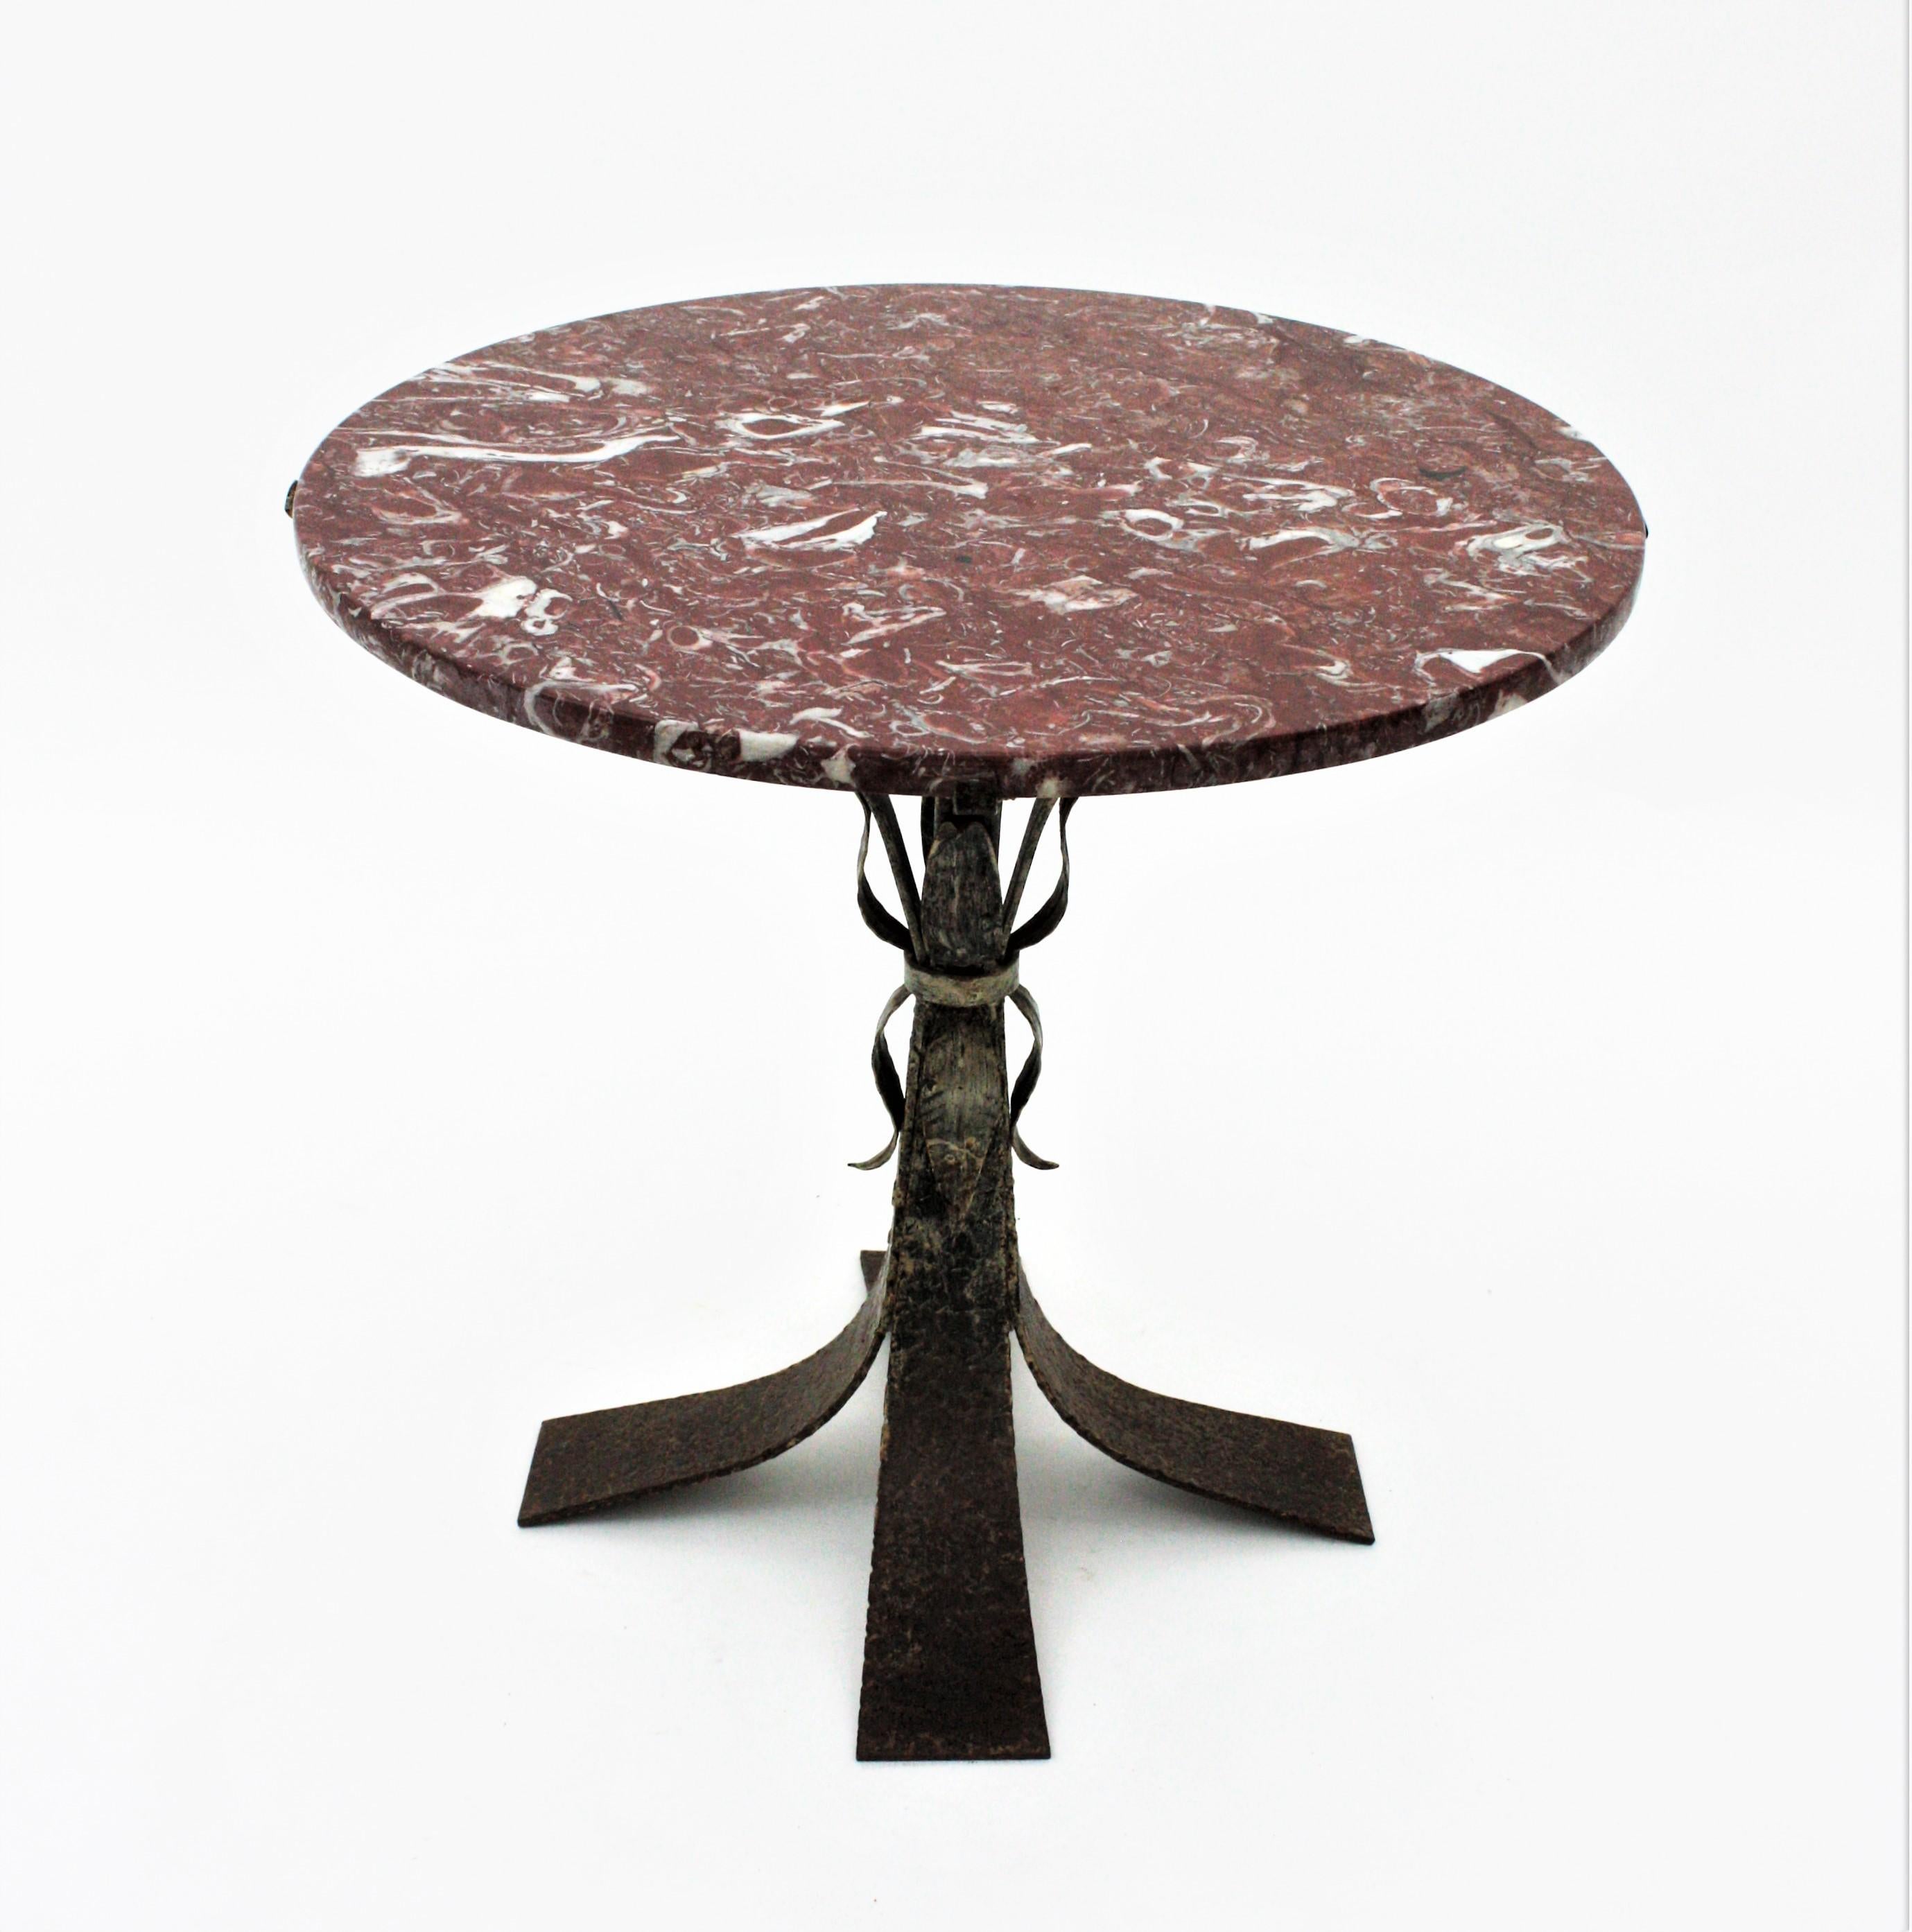 Spanish Wrought Iron Round Coffee Table with Garnet Marble Top